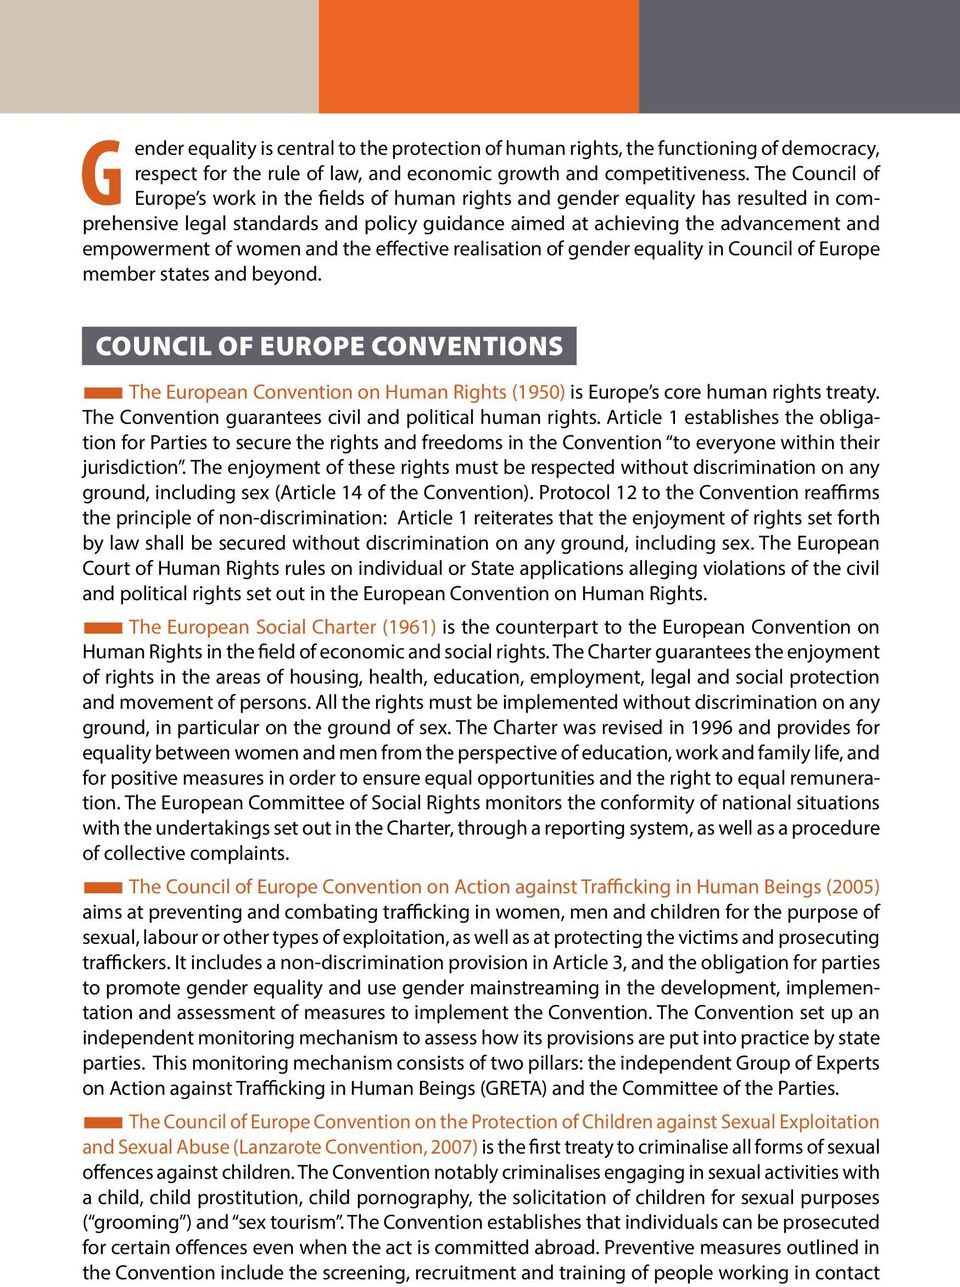 women and the effective realisation of gender equality in Council of Europe member states and beyond.